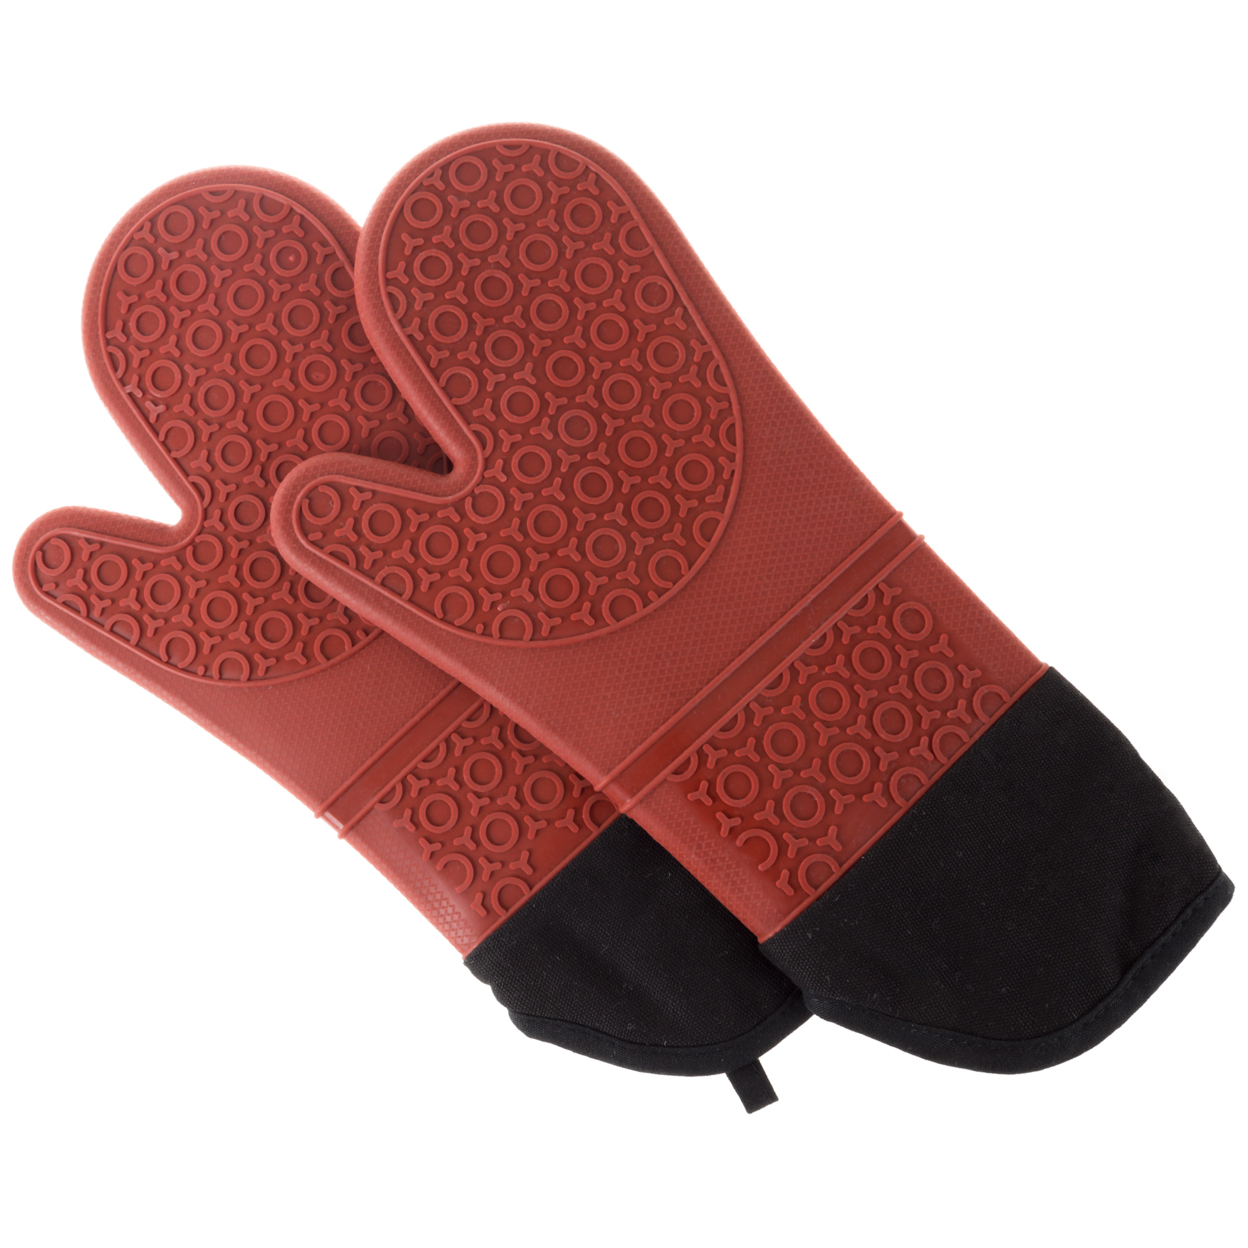 Silicone Oven Mits Extra Long Professional Quality Heat Resistant With Quilted Lining And 2-sided Textured Grip 1 Pair Dark Red